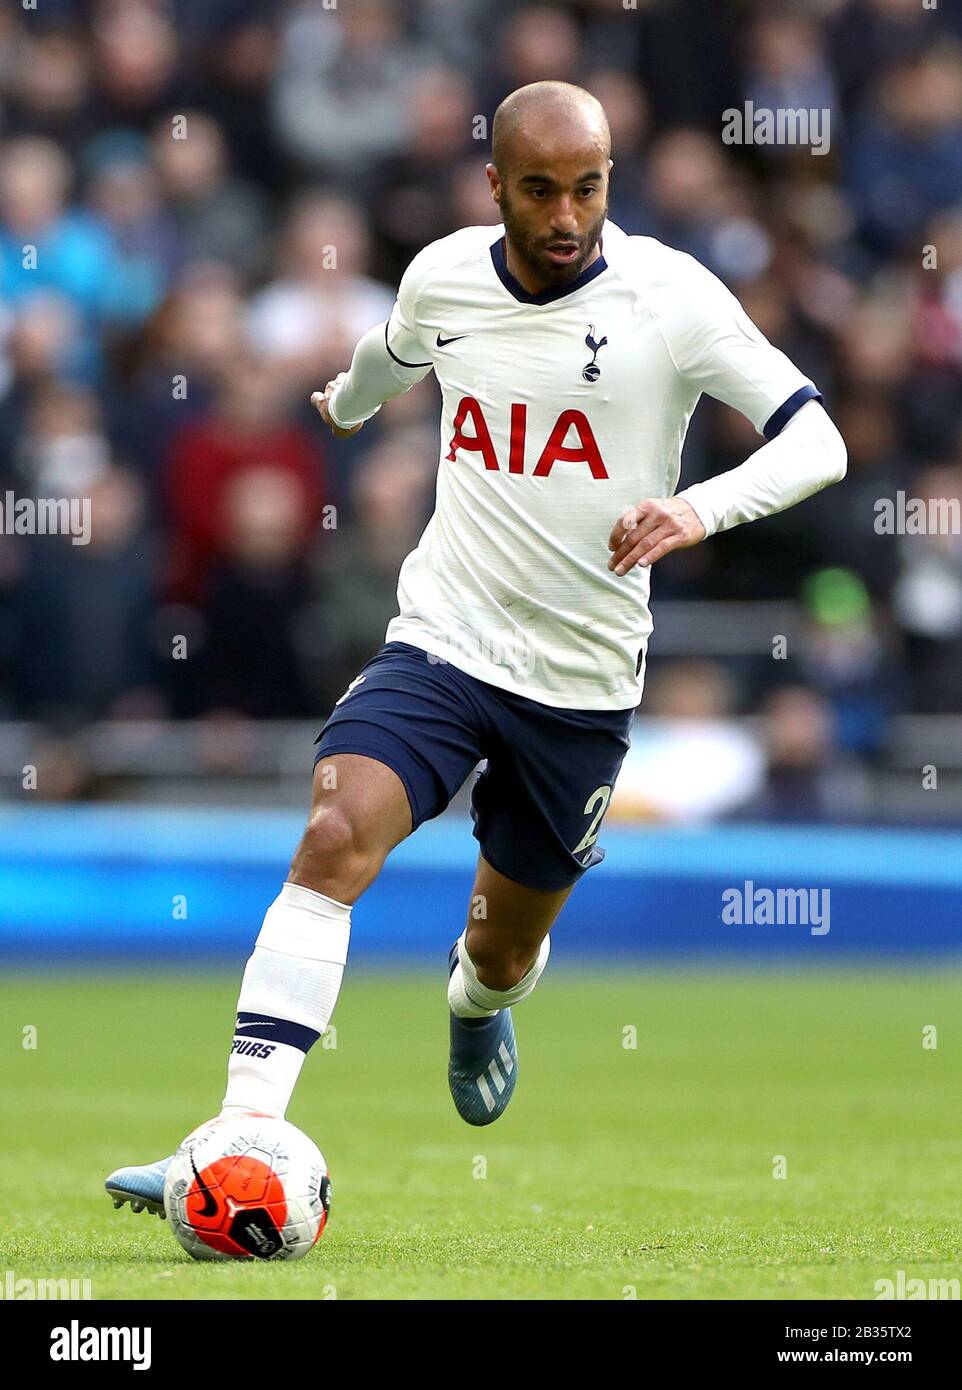 Tottenham Hotspur's Lucas Moura during the Premier League match at the Tottenham Hotspur Stadium, London. PA Photo. Picture date: Sunday March 1, 2020. See PA story SOCCER Tottenham. Photo credit should read: Bradley Collyer/PA Wire. RESTRICTIONS: No use with unauthorised audio, video, data, fixture lists, club/league logos or 'live' services. Online in-match use limited to 120 images, no video emulation. No use in betting, games or single club/league/player publications. Stock Photo